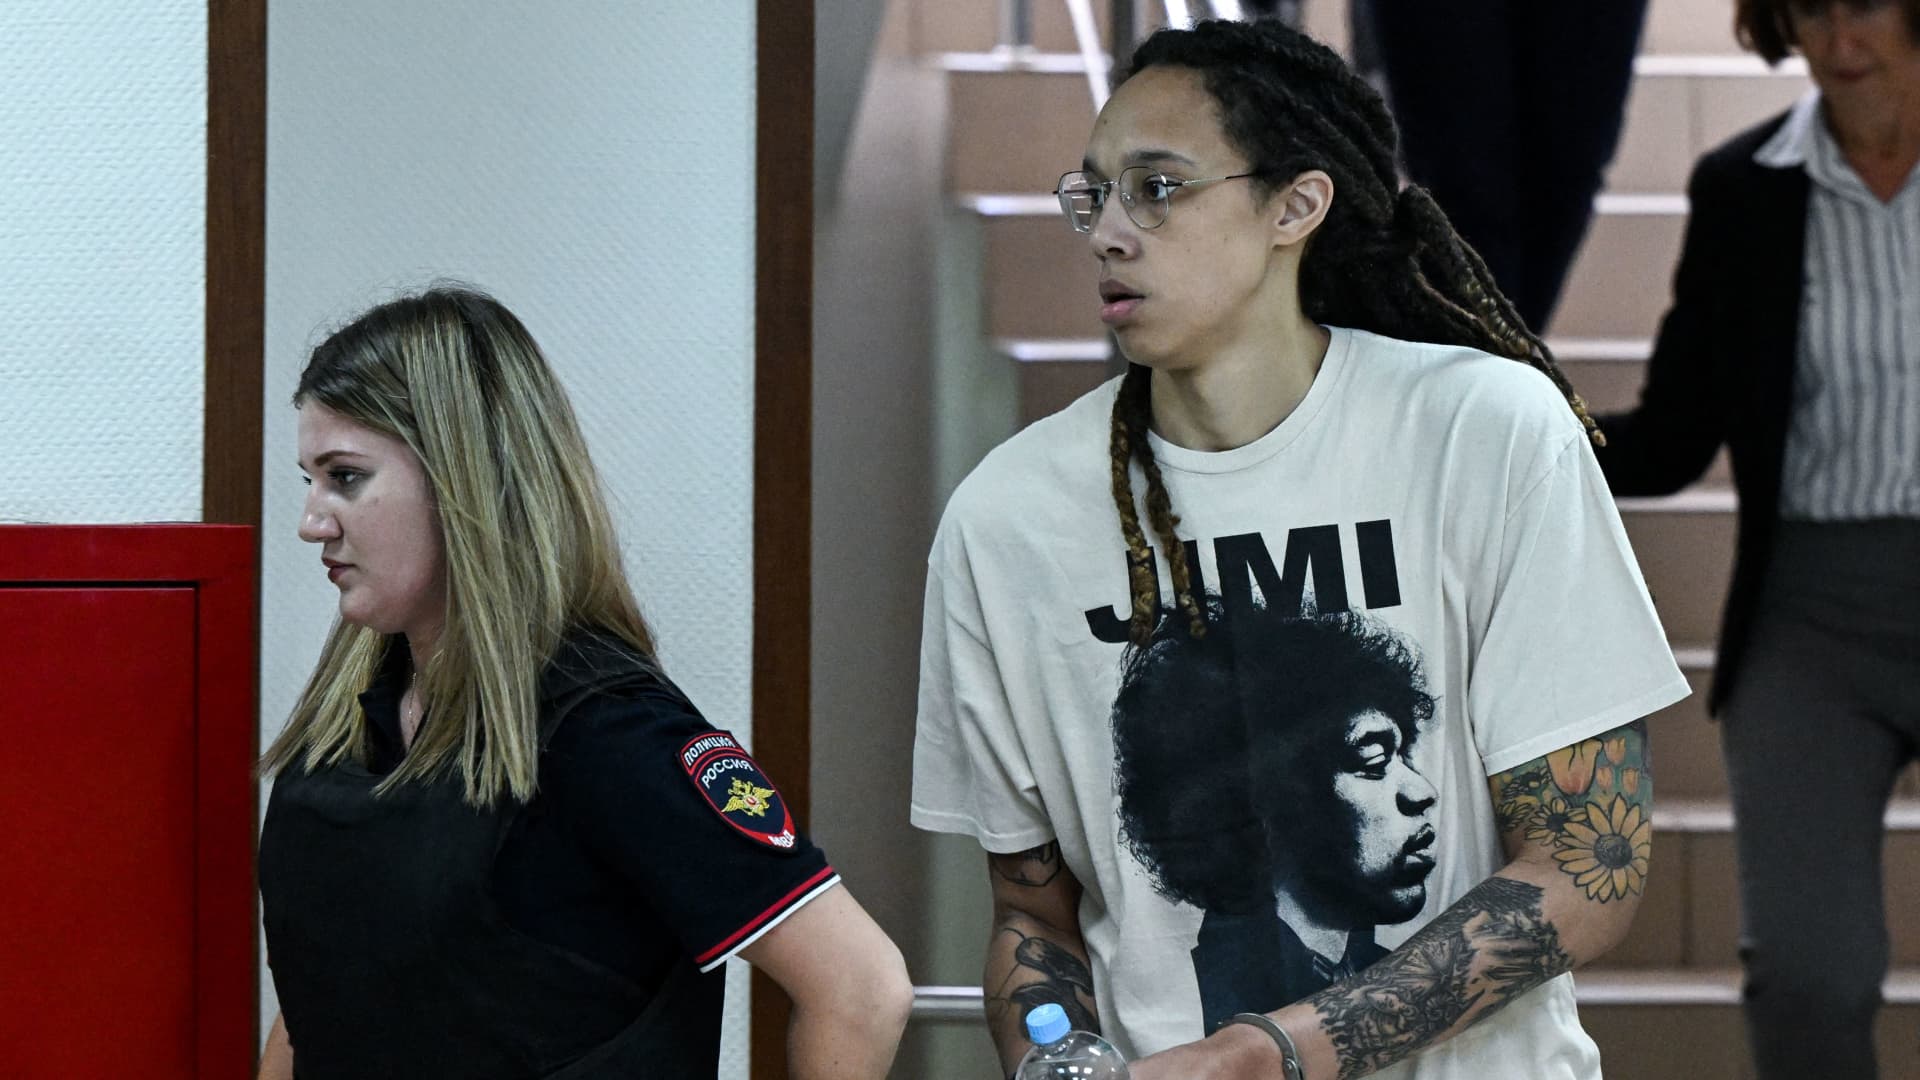 US WNBA basketball superstar Brittney Griner arrives to a hearing at the Khimki Court, outside Moscow on July 1, 2022.